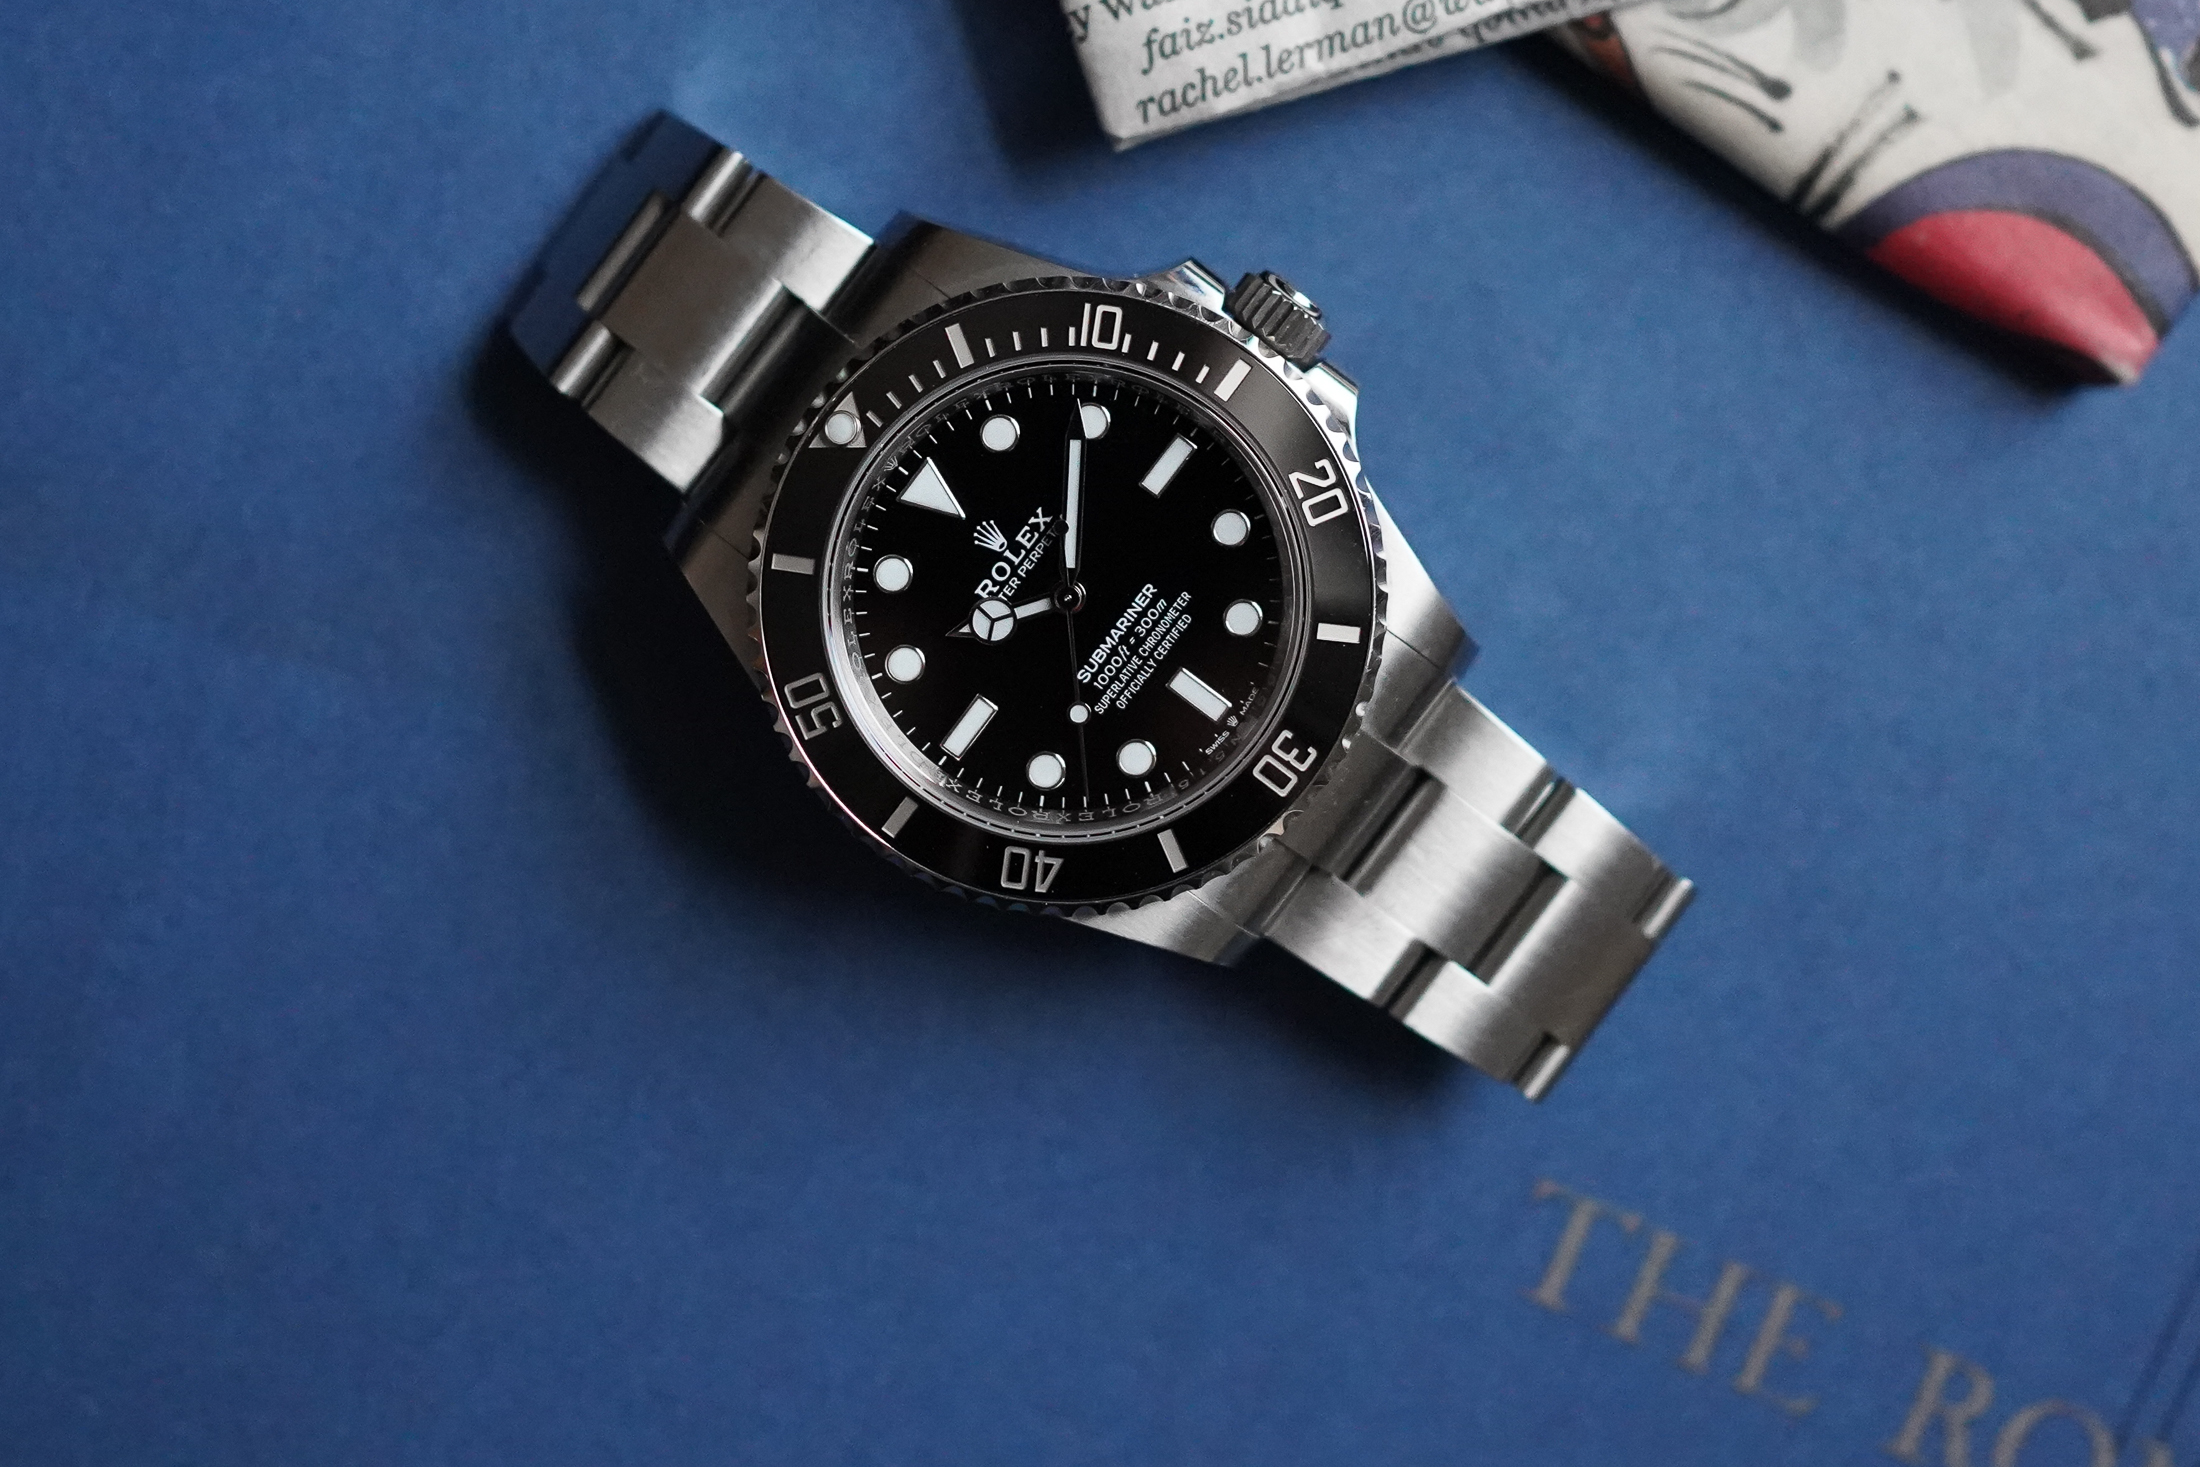 rolex submariner stopped working